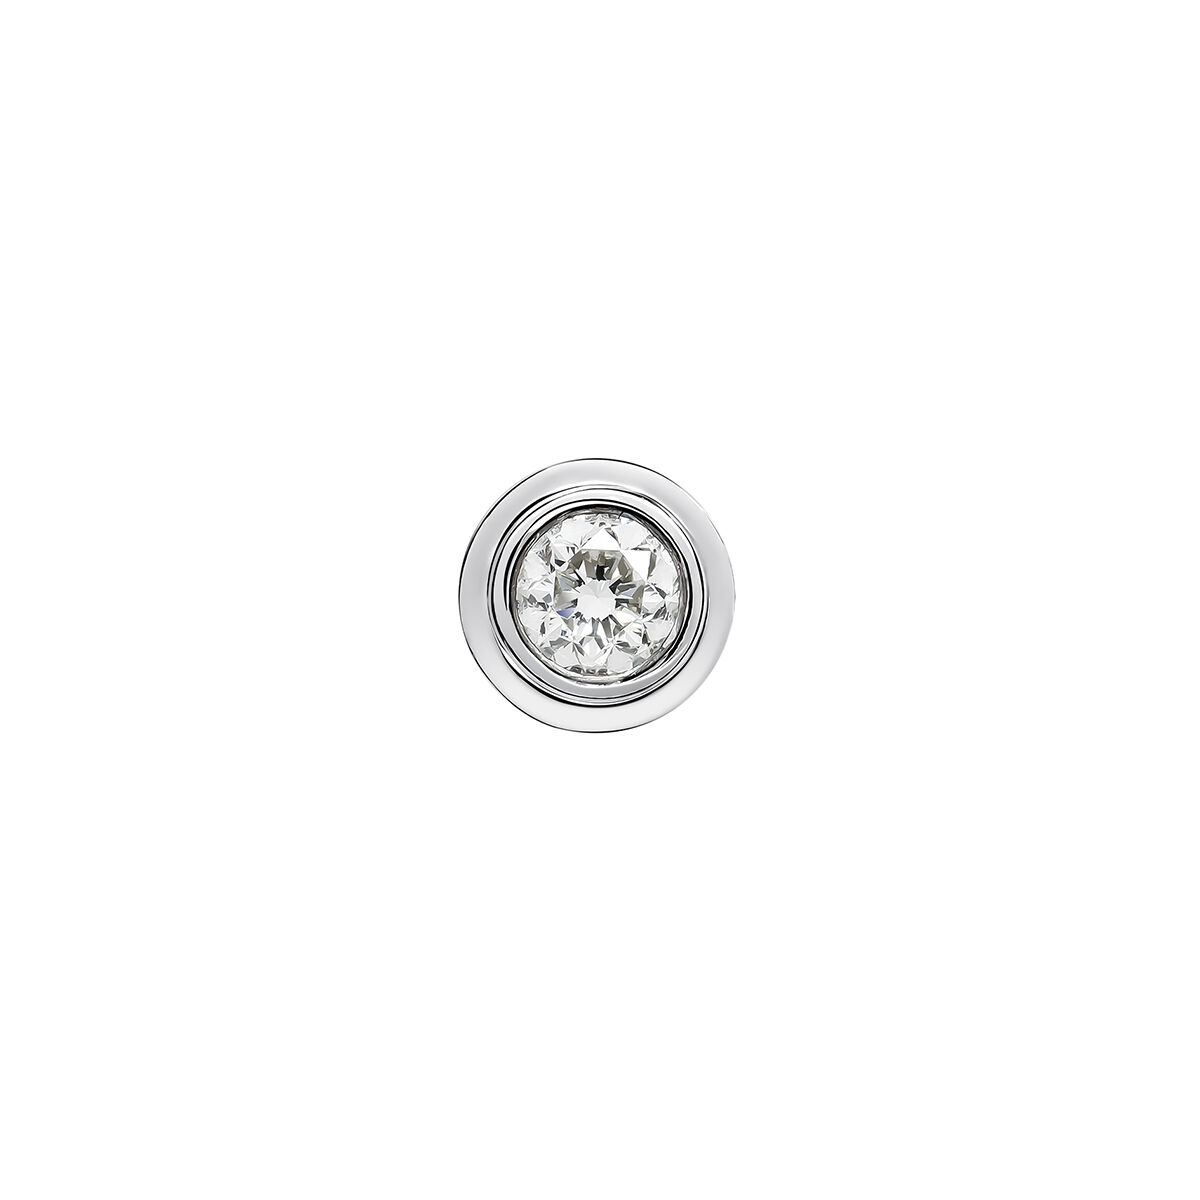 White gold double chaton earring 0.07 ct. , J03404-01-07-H, hi-res